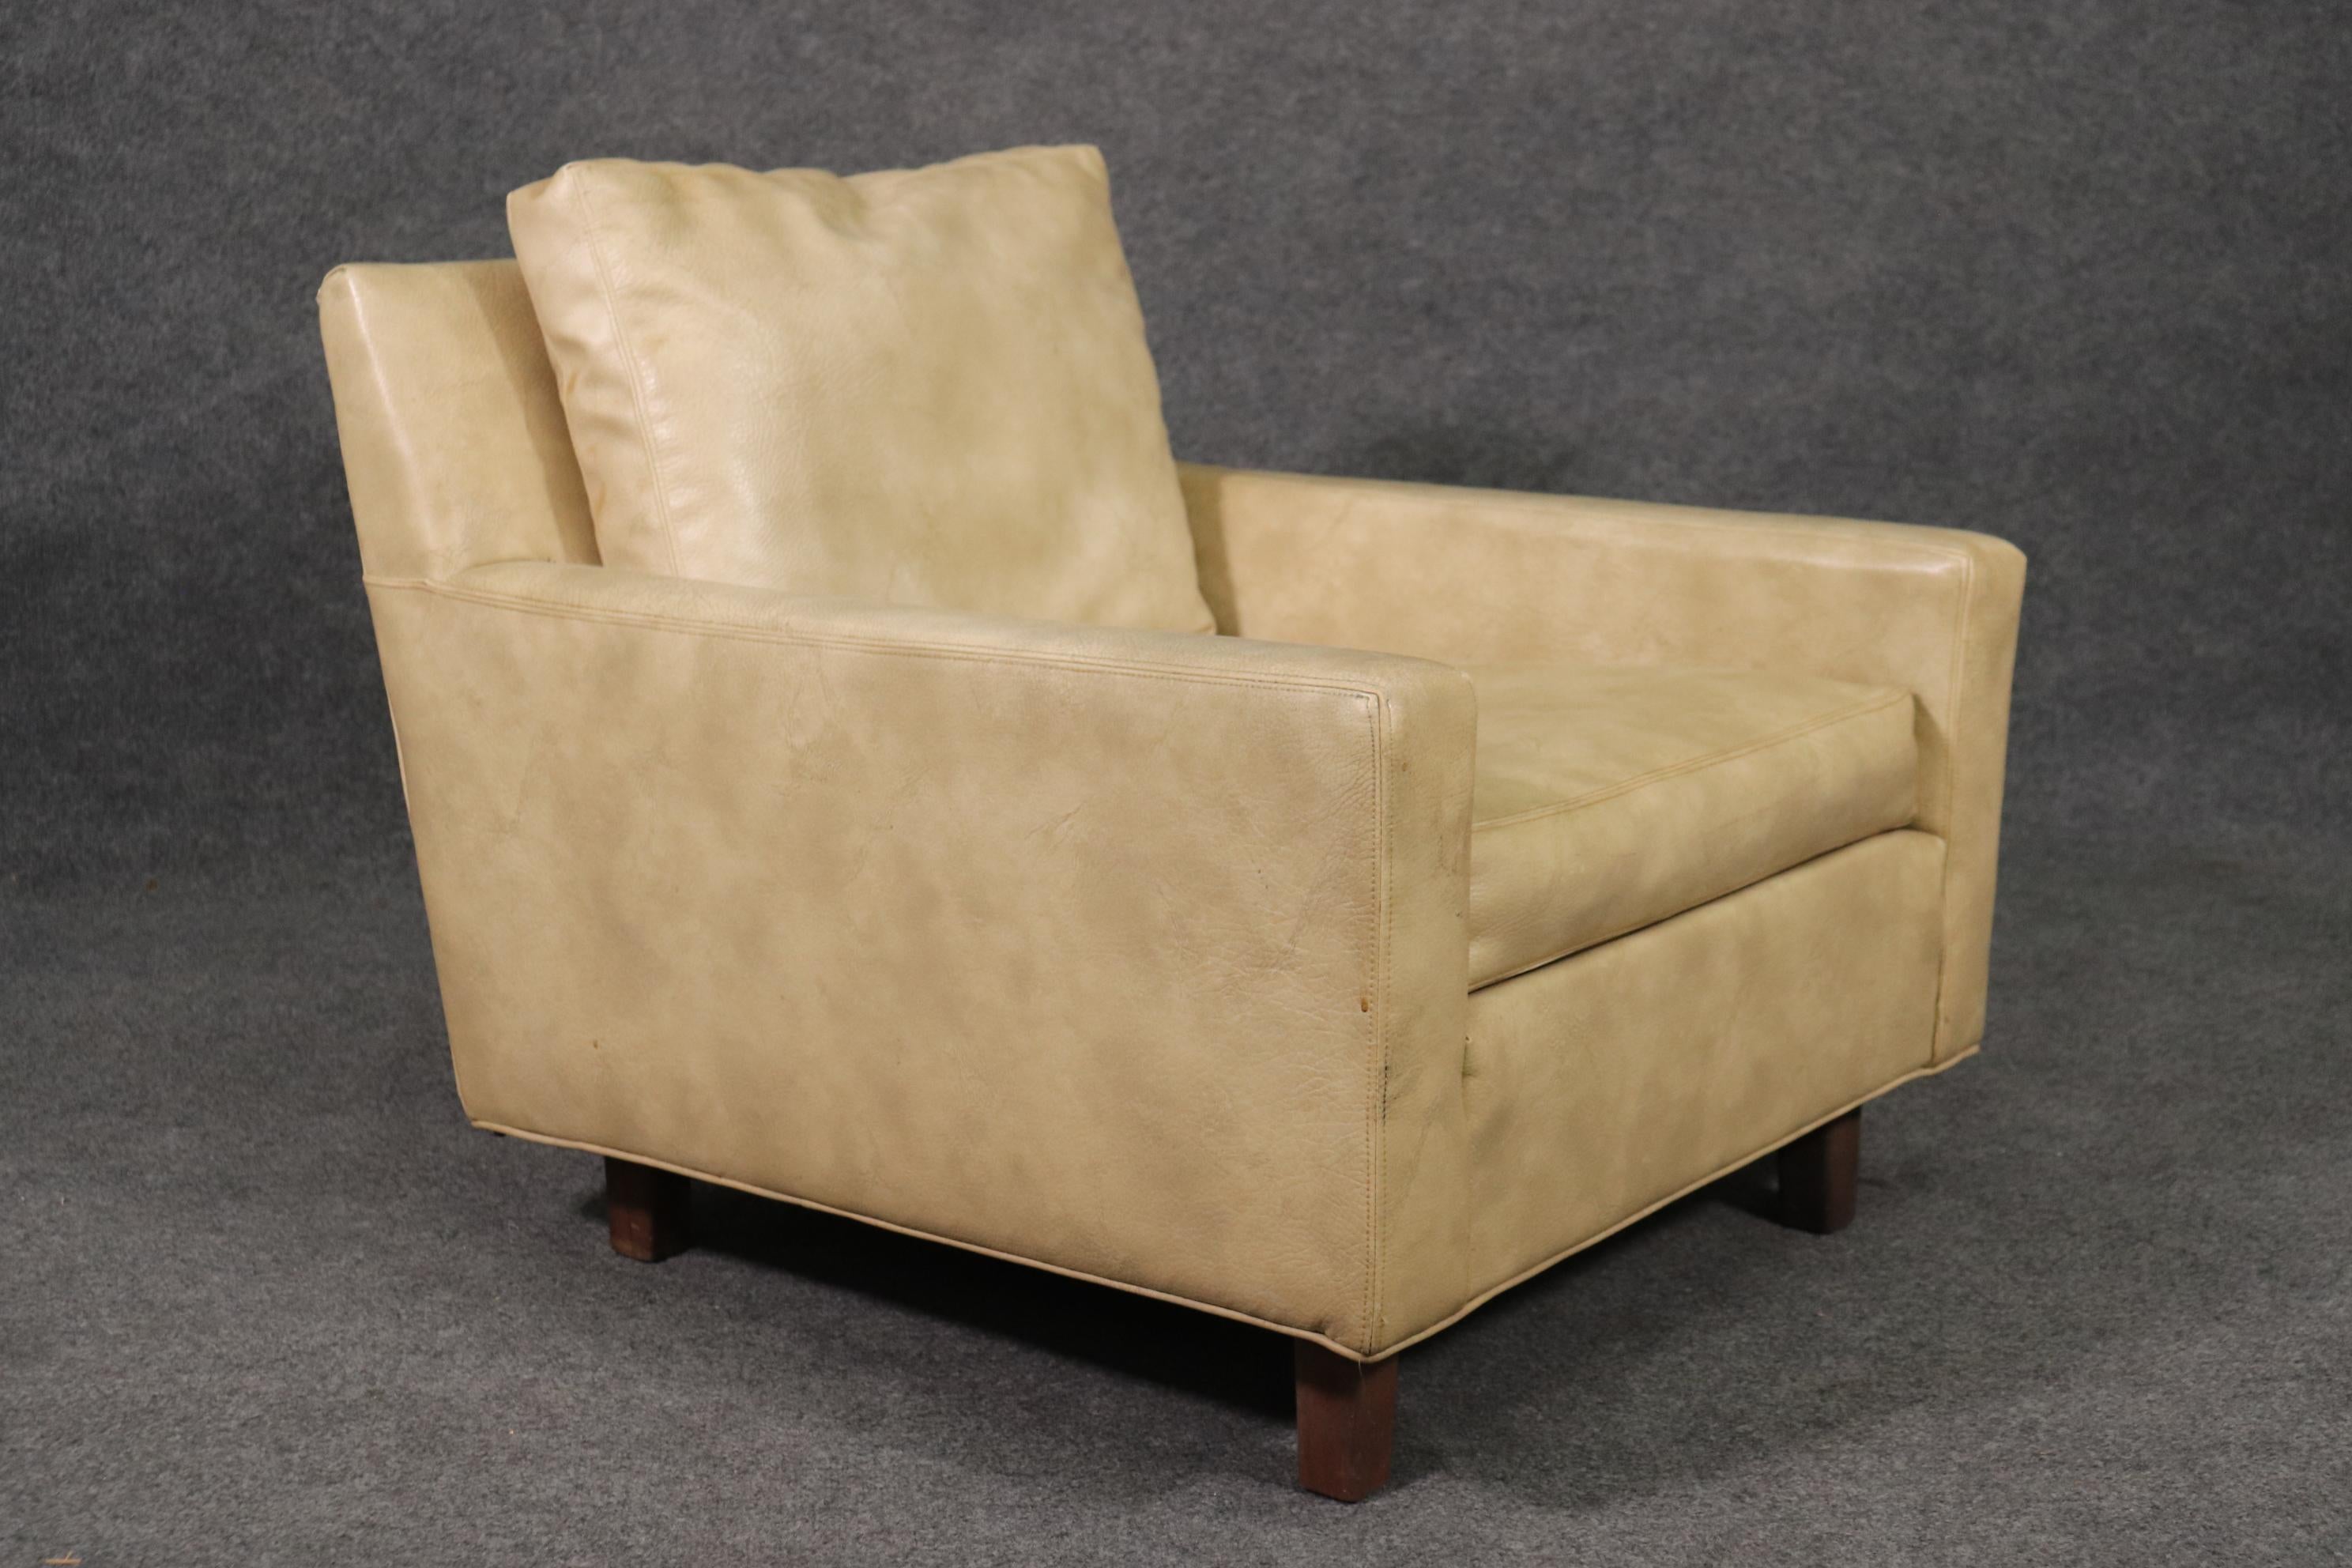 This is a comfortable and beautiful club chair by the famed firm of Thayer Cofggin who made numerous Milo Baughman designs. The chair measures 28 inches tall x 29.5 wide x 33.25 deep. The seat height is 15 inches and the chair dates to teh 1970s.